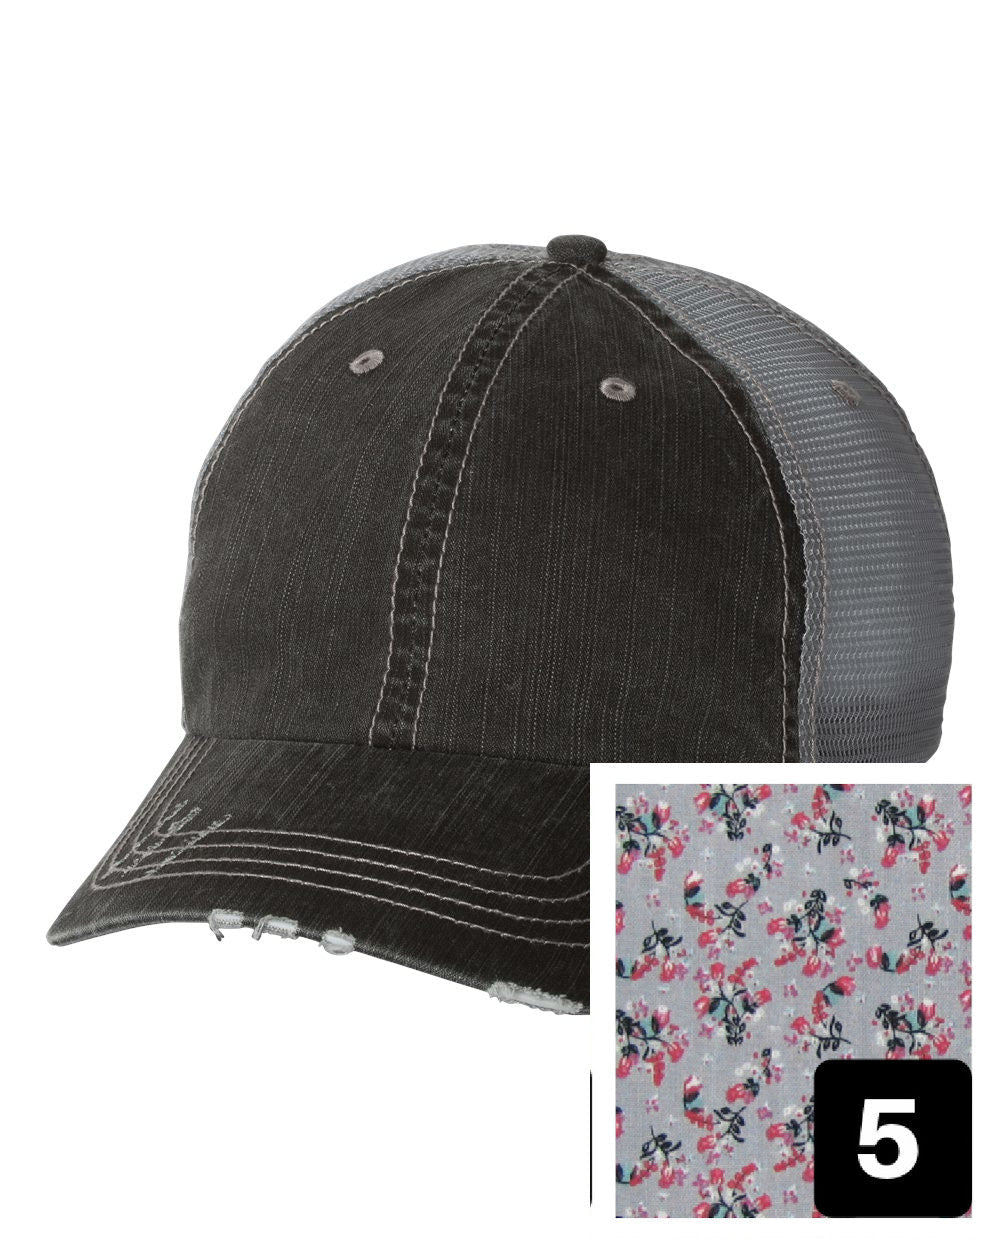 gray distressed trucker hat with purple and pink floral fabric state of Maryland